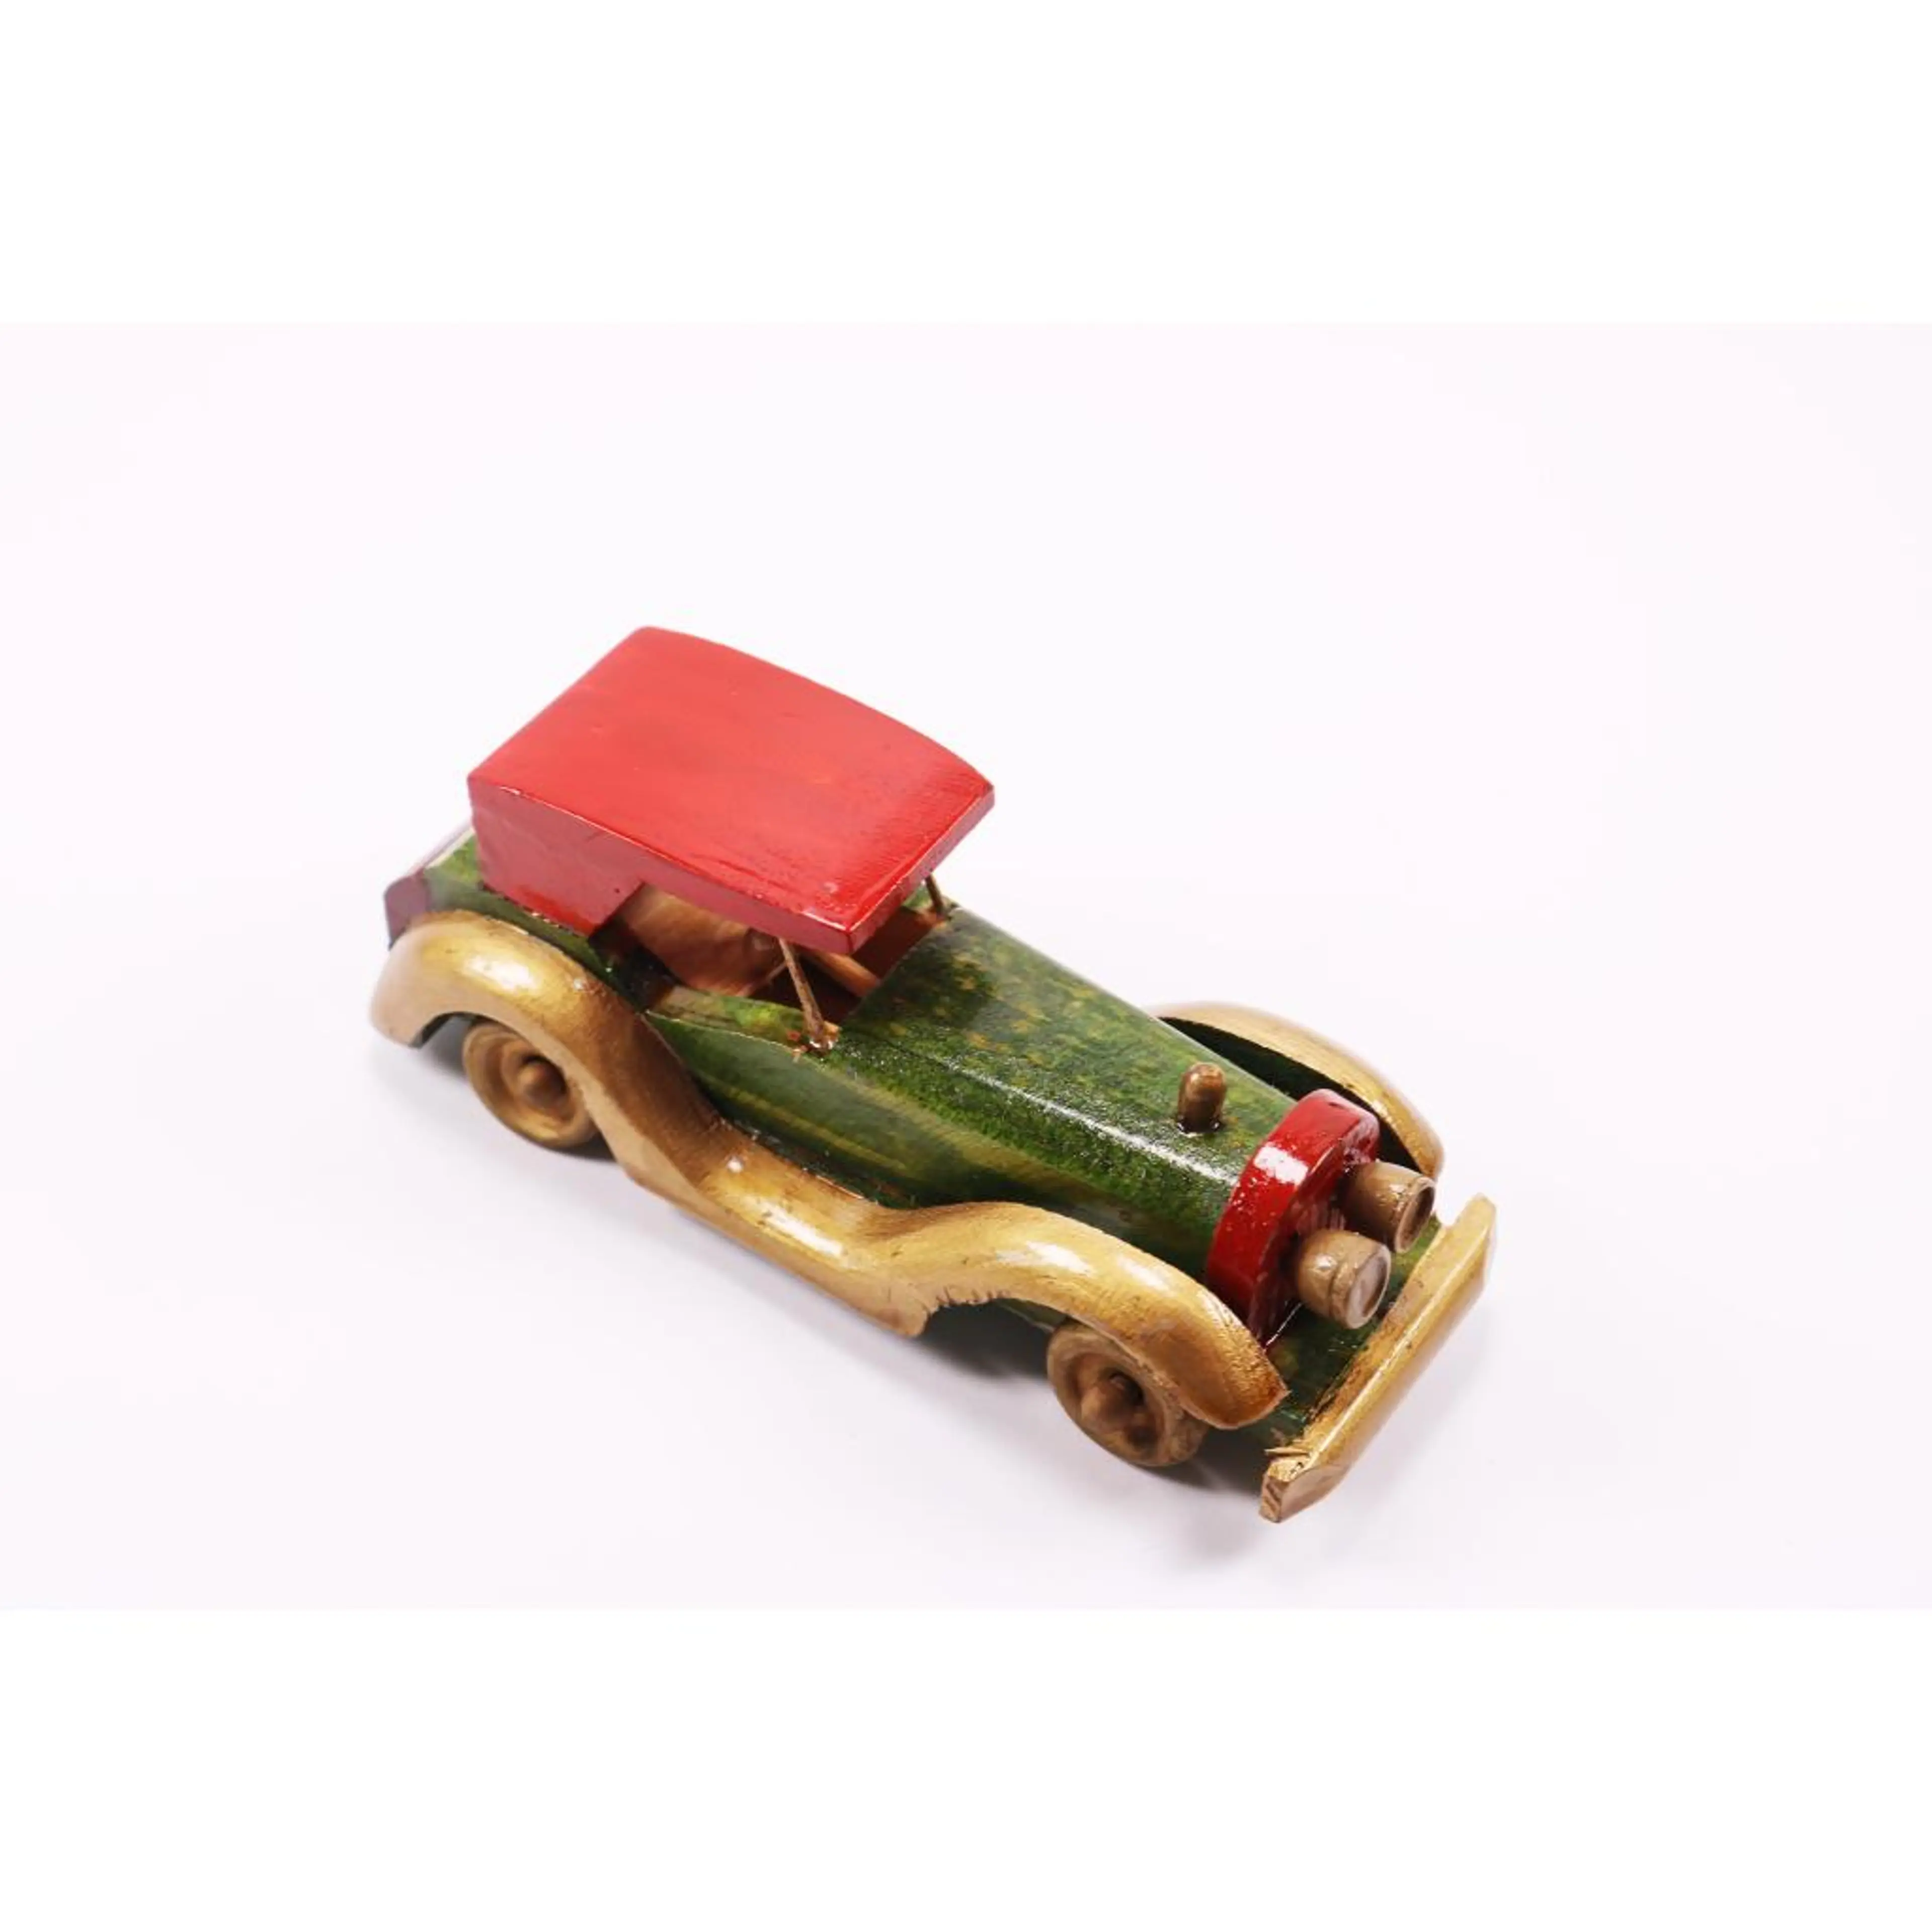 Toy Wooden Car Play Vehicles Vintage